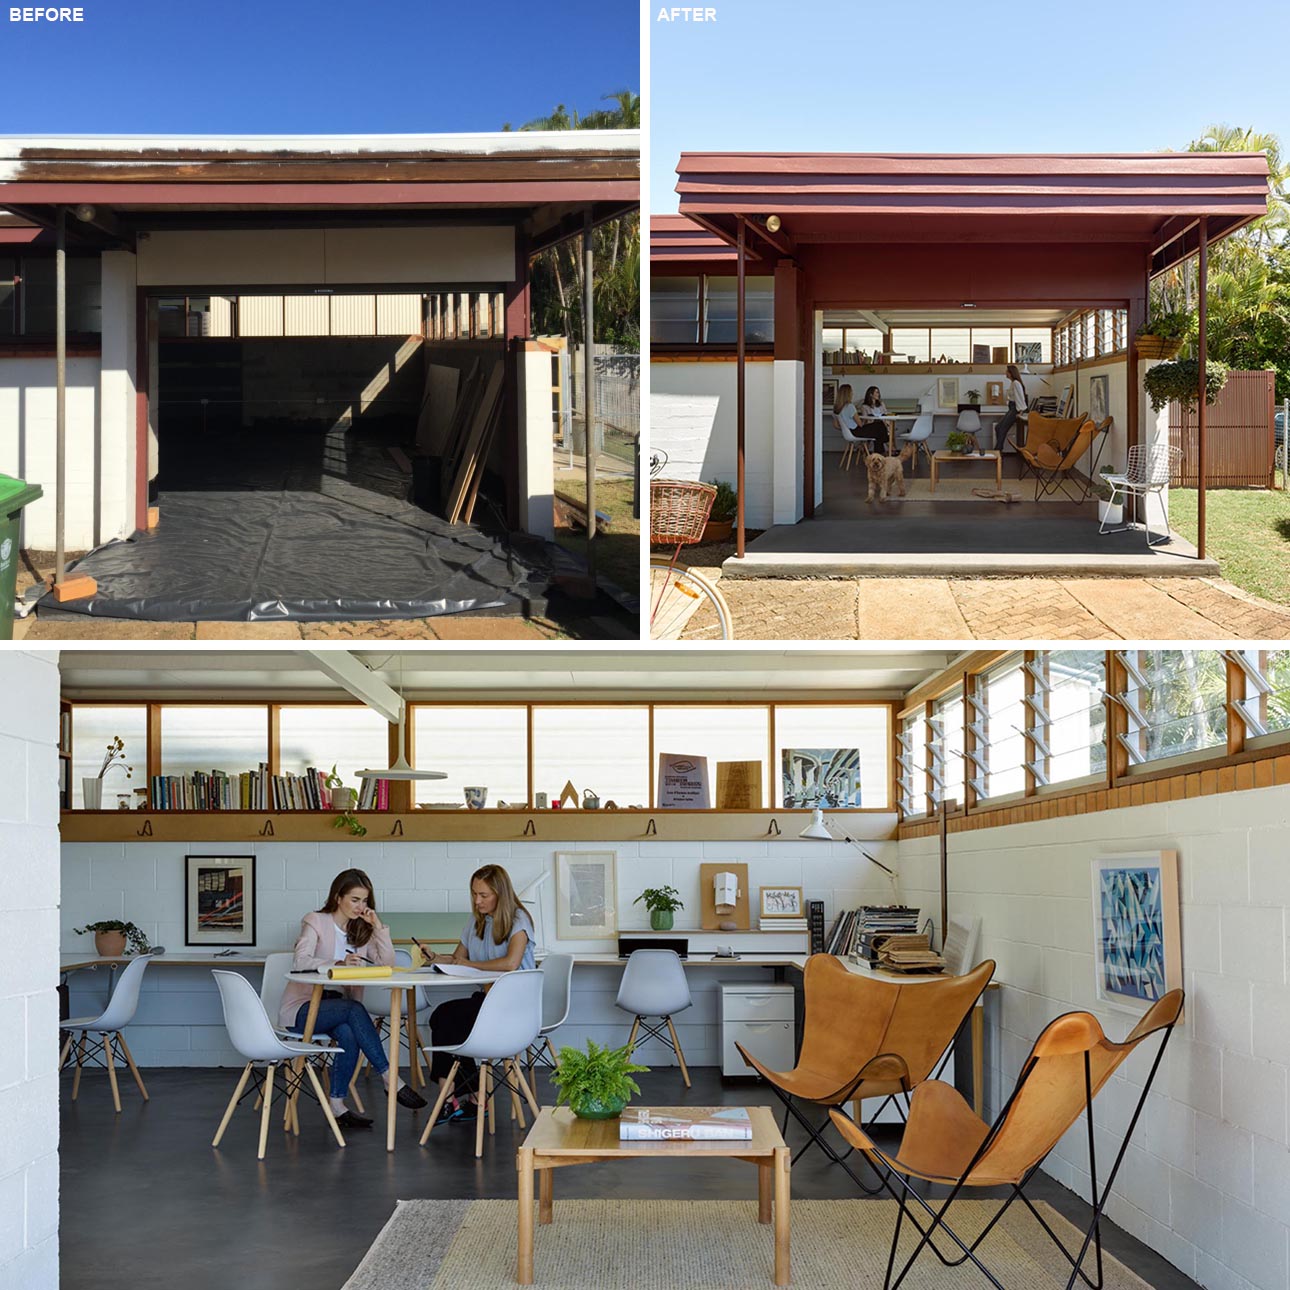 A converted carport acts as an office for 4-5 people, and can be transformed into a secondary suite if needed one day.